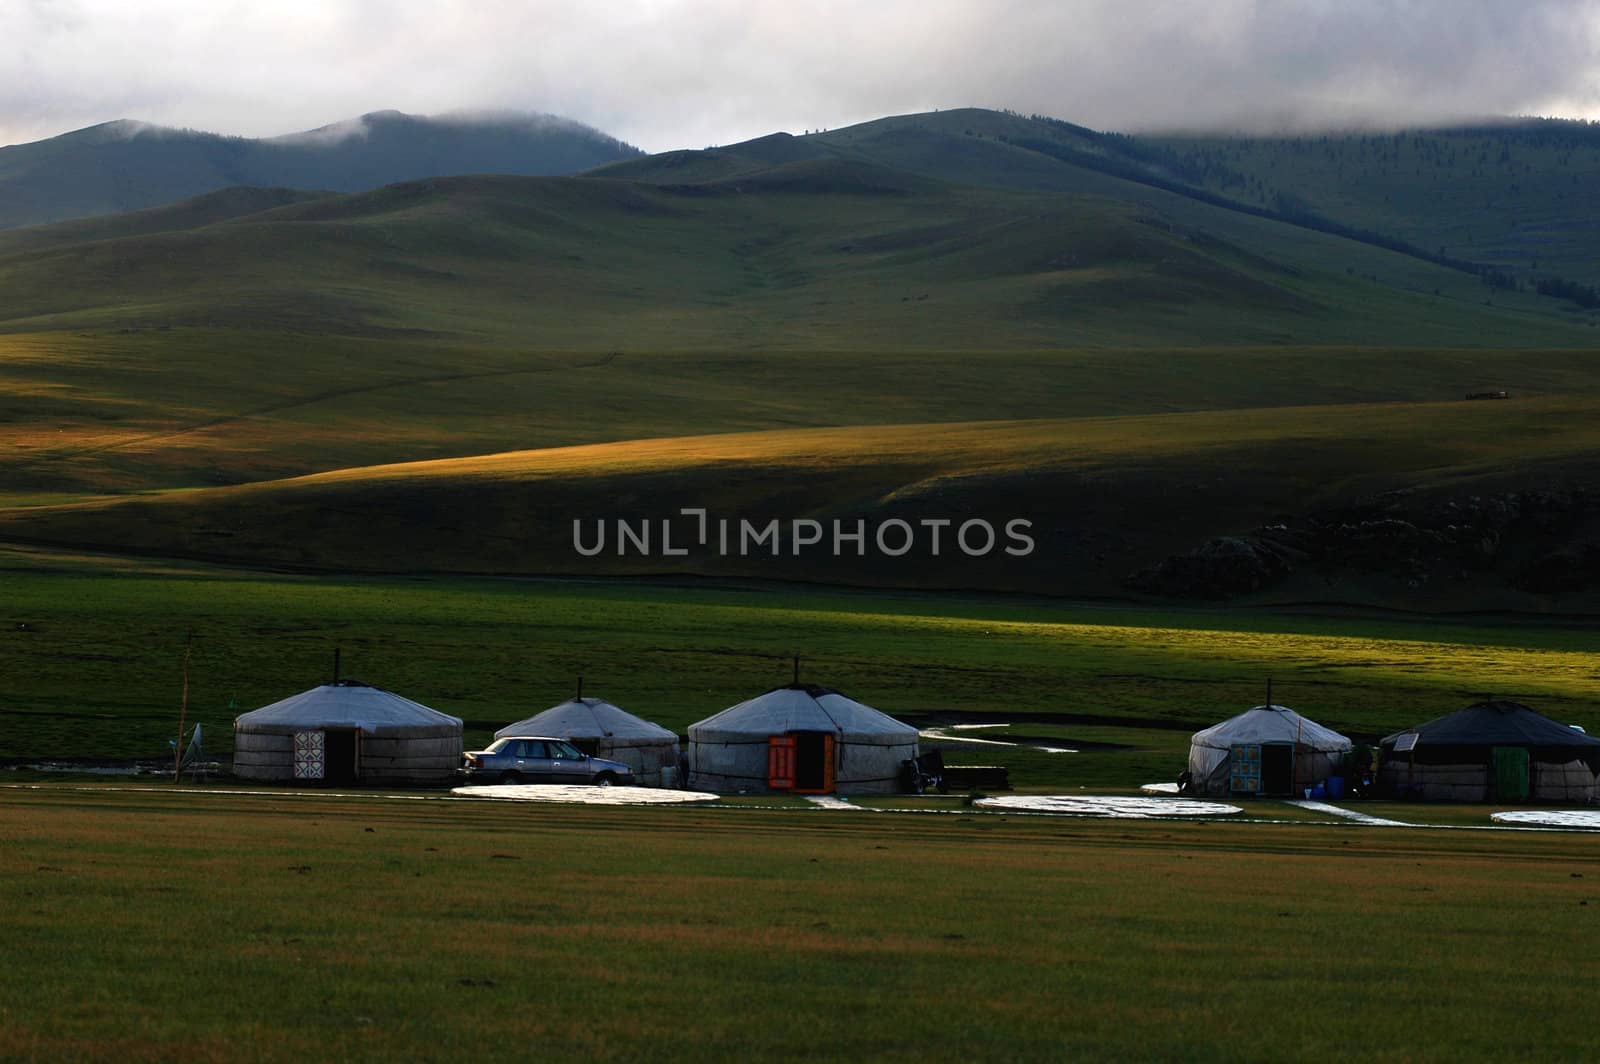 Landscape of gers at the foot of mountains in Mongolia